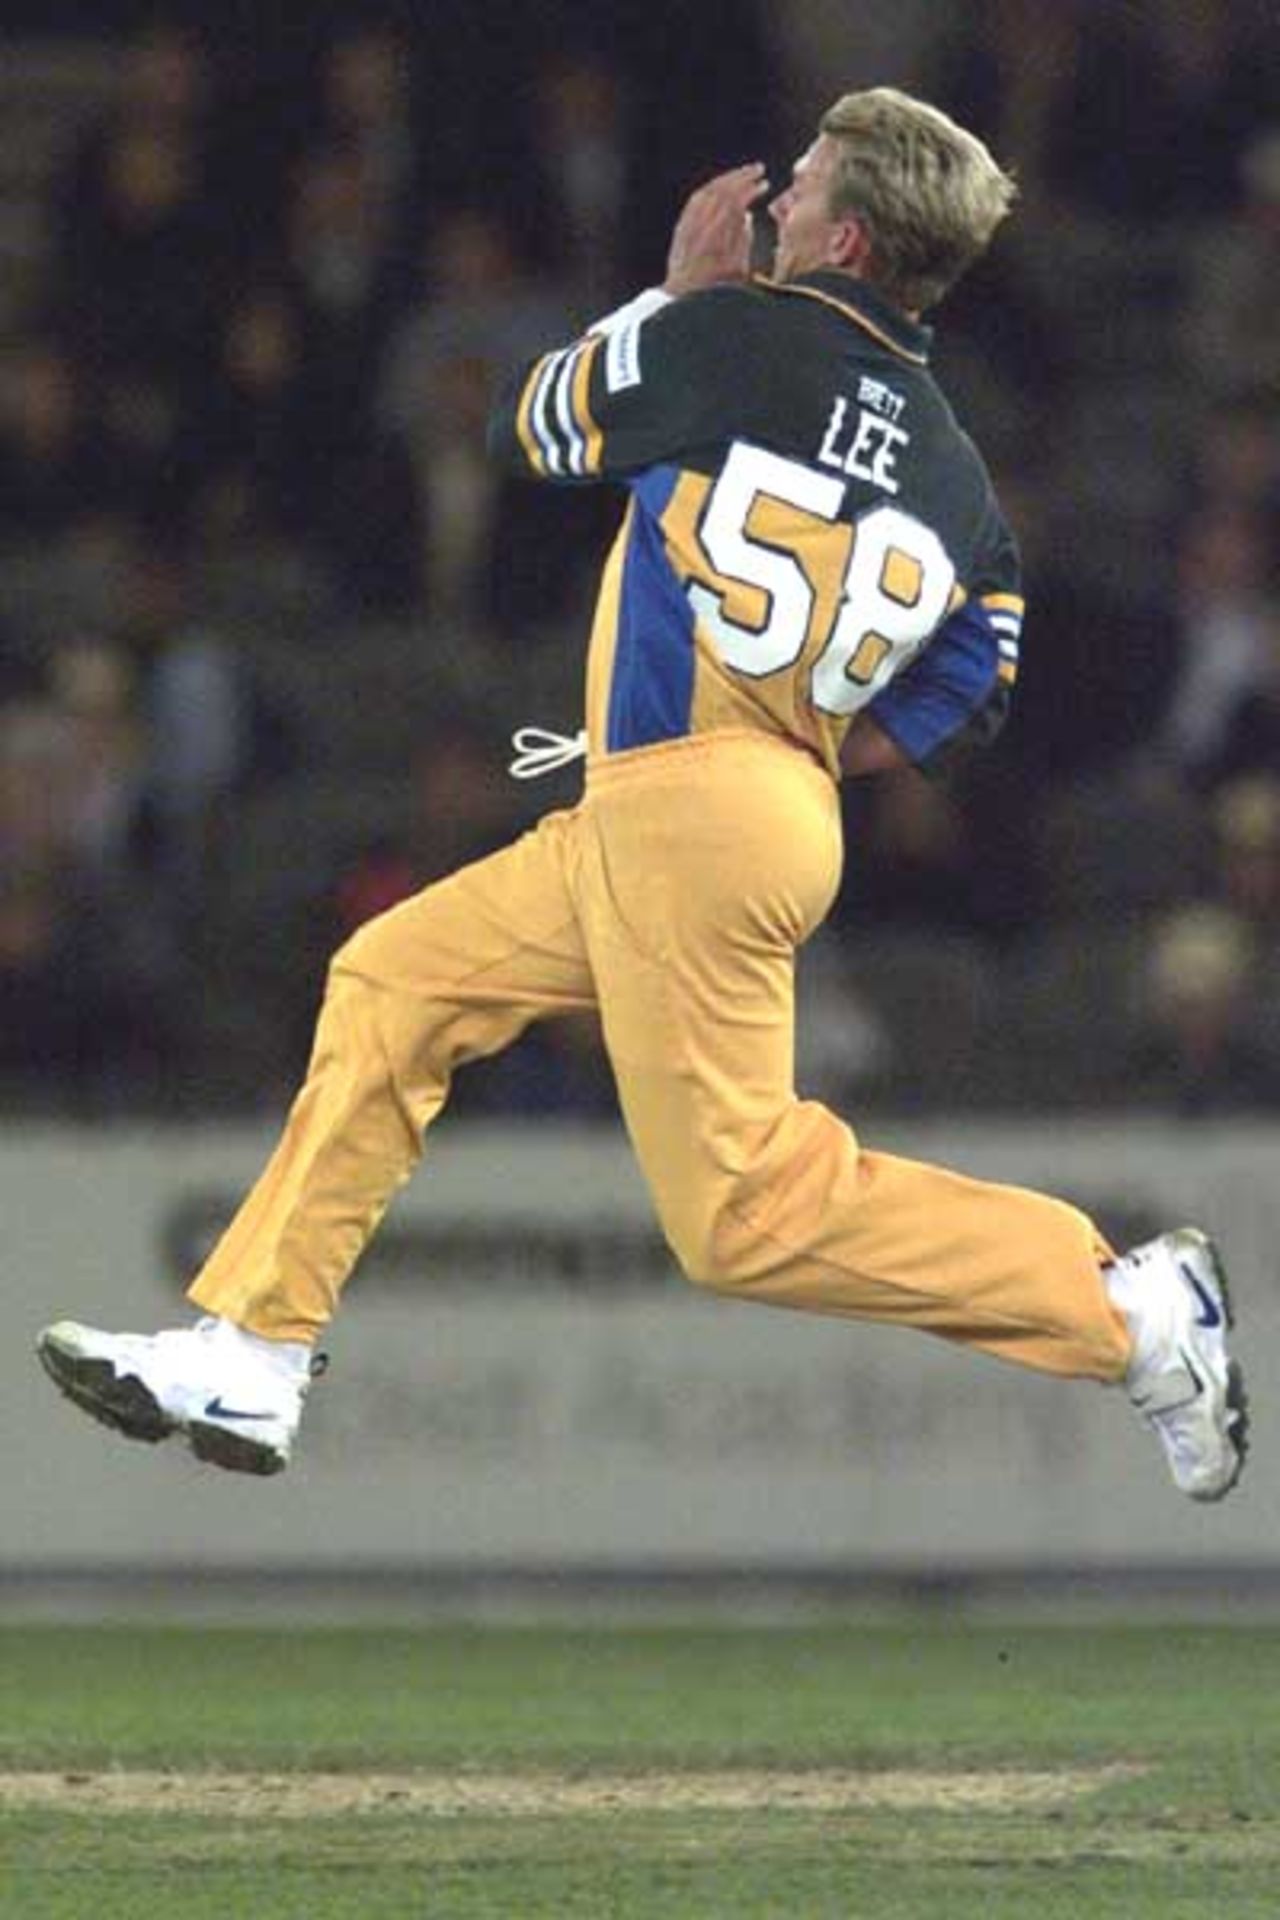 16 Aug 2000: Brett Lee of Australia comes in to bowl in the match between Australia and South Africa, in game one of the Super Challenge 2000, played at Colonial Stadium in Melbourne, Australia. This is the first game of cricket to be played indoors.